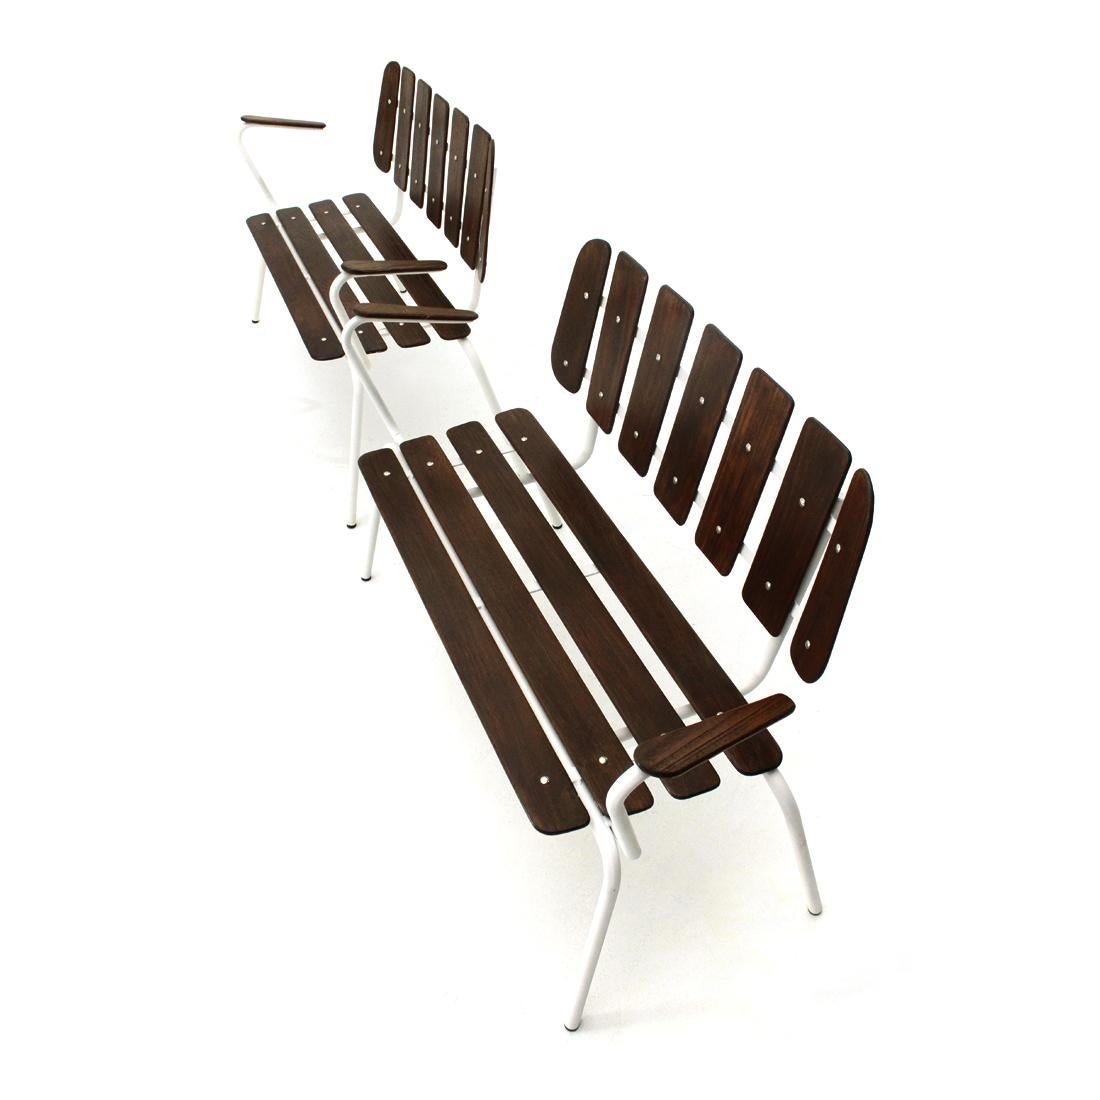 Pair of White Metal Benches with Wooden Slats, 1950s For Sale 2